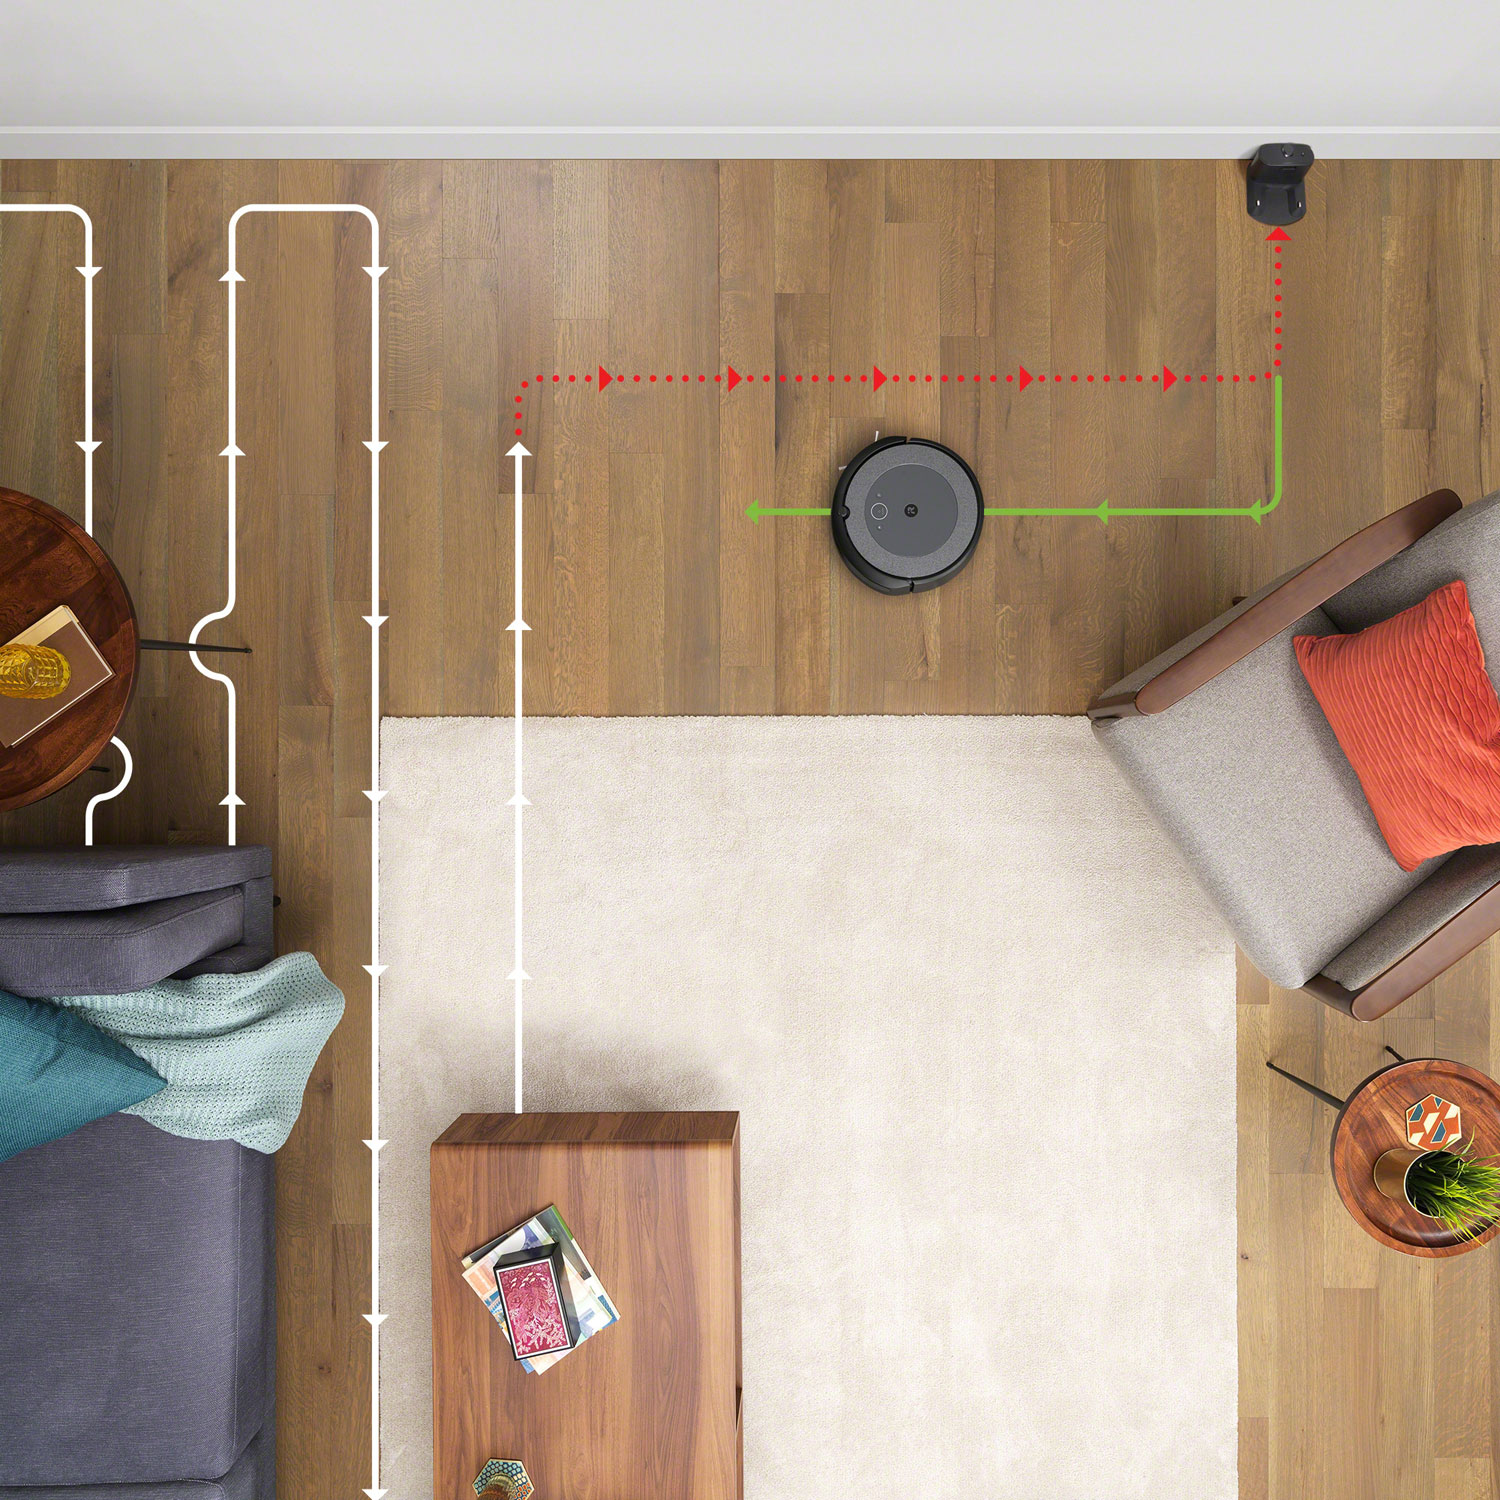 Robot vacuum mapping